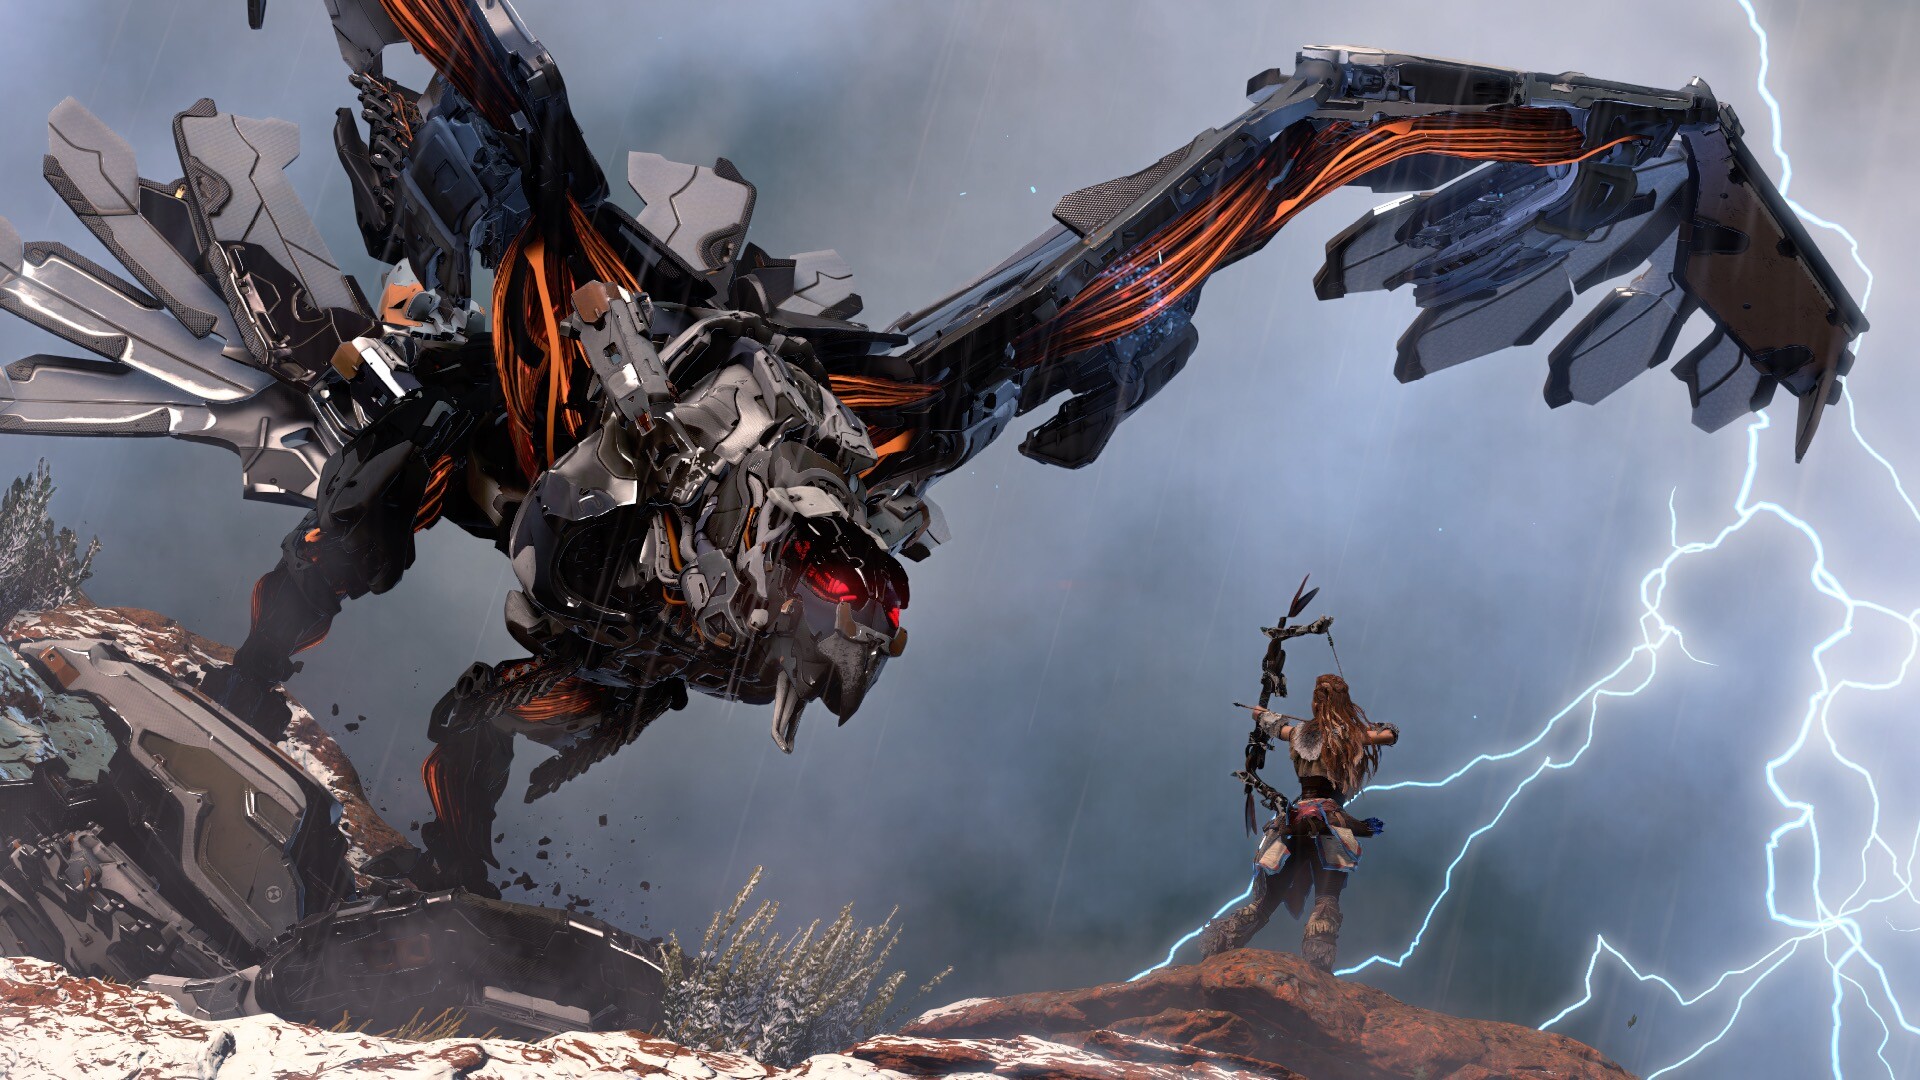 Horizon Zero Dawn: An action role playing game exclusively for the PlayStation 4 System, developed by Guerrilla Games. 1920x1080 Full HD Background.